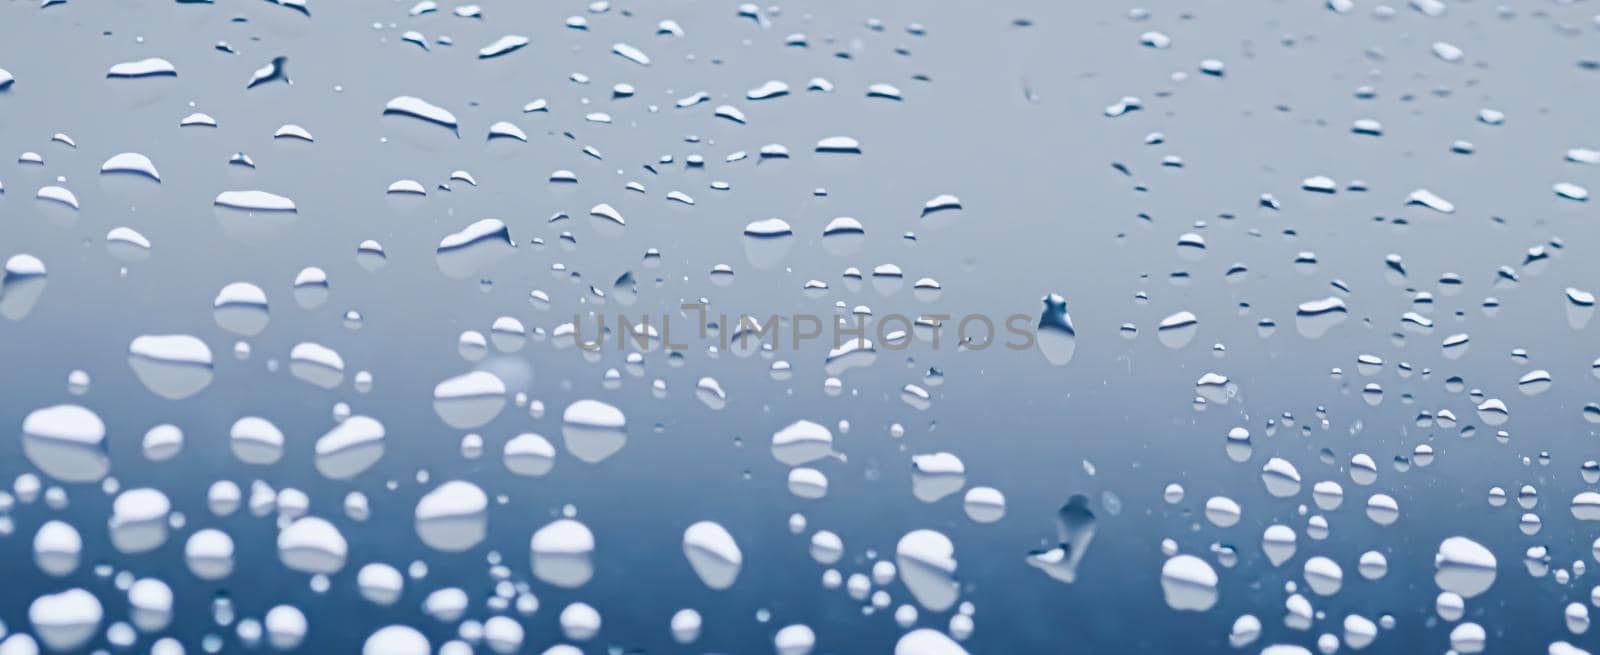 Liquid water drops on glass surface, abstract backdrop and science background by Anneleven